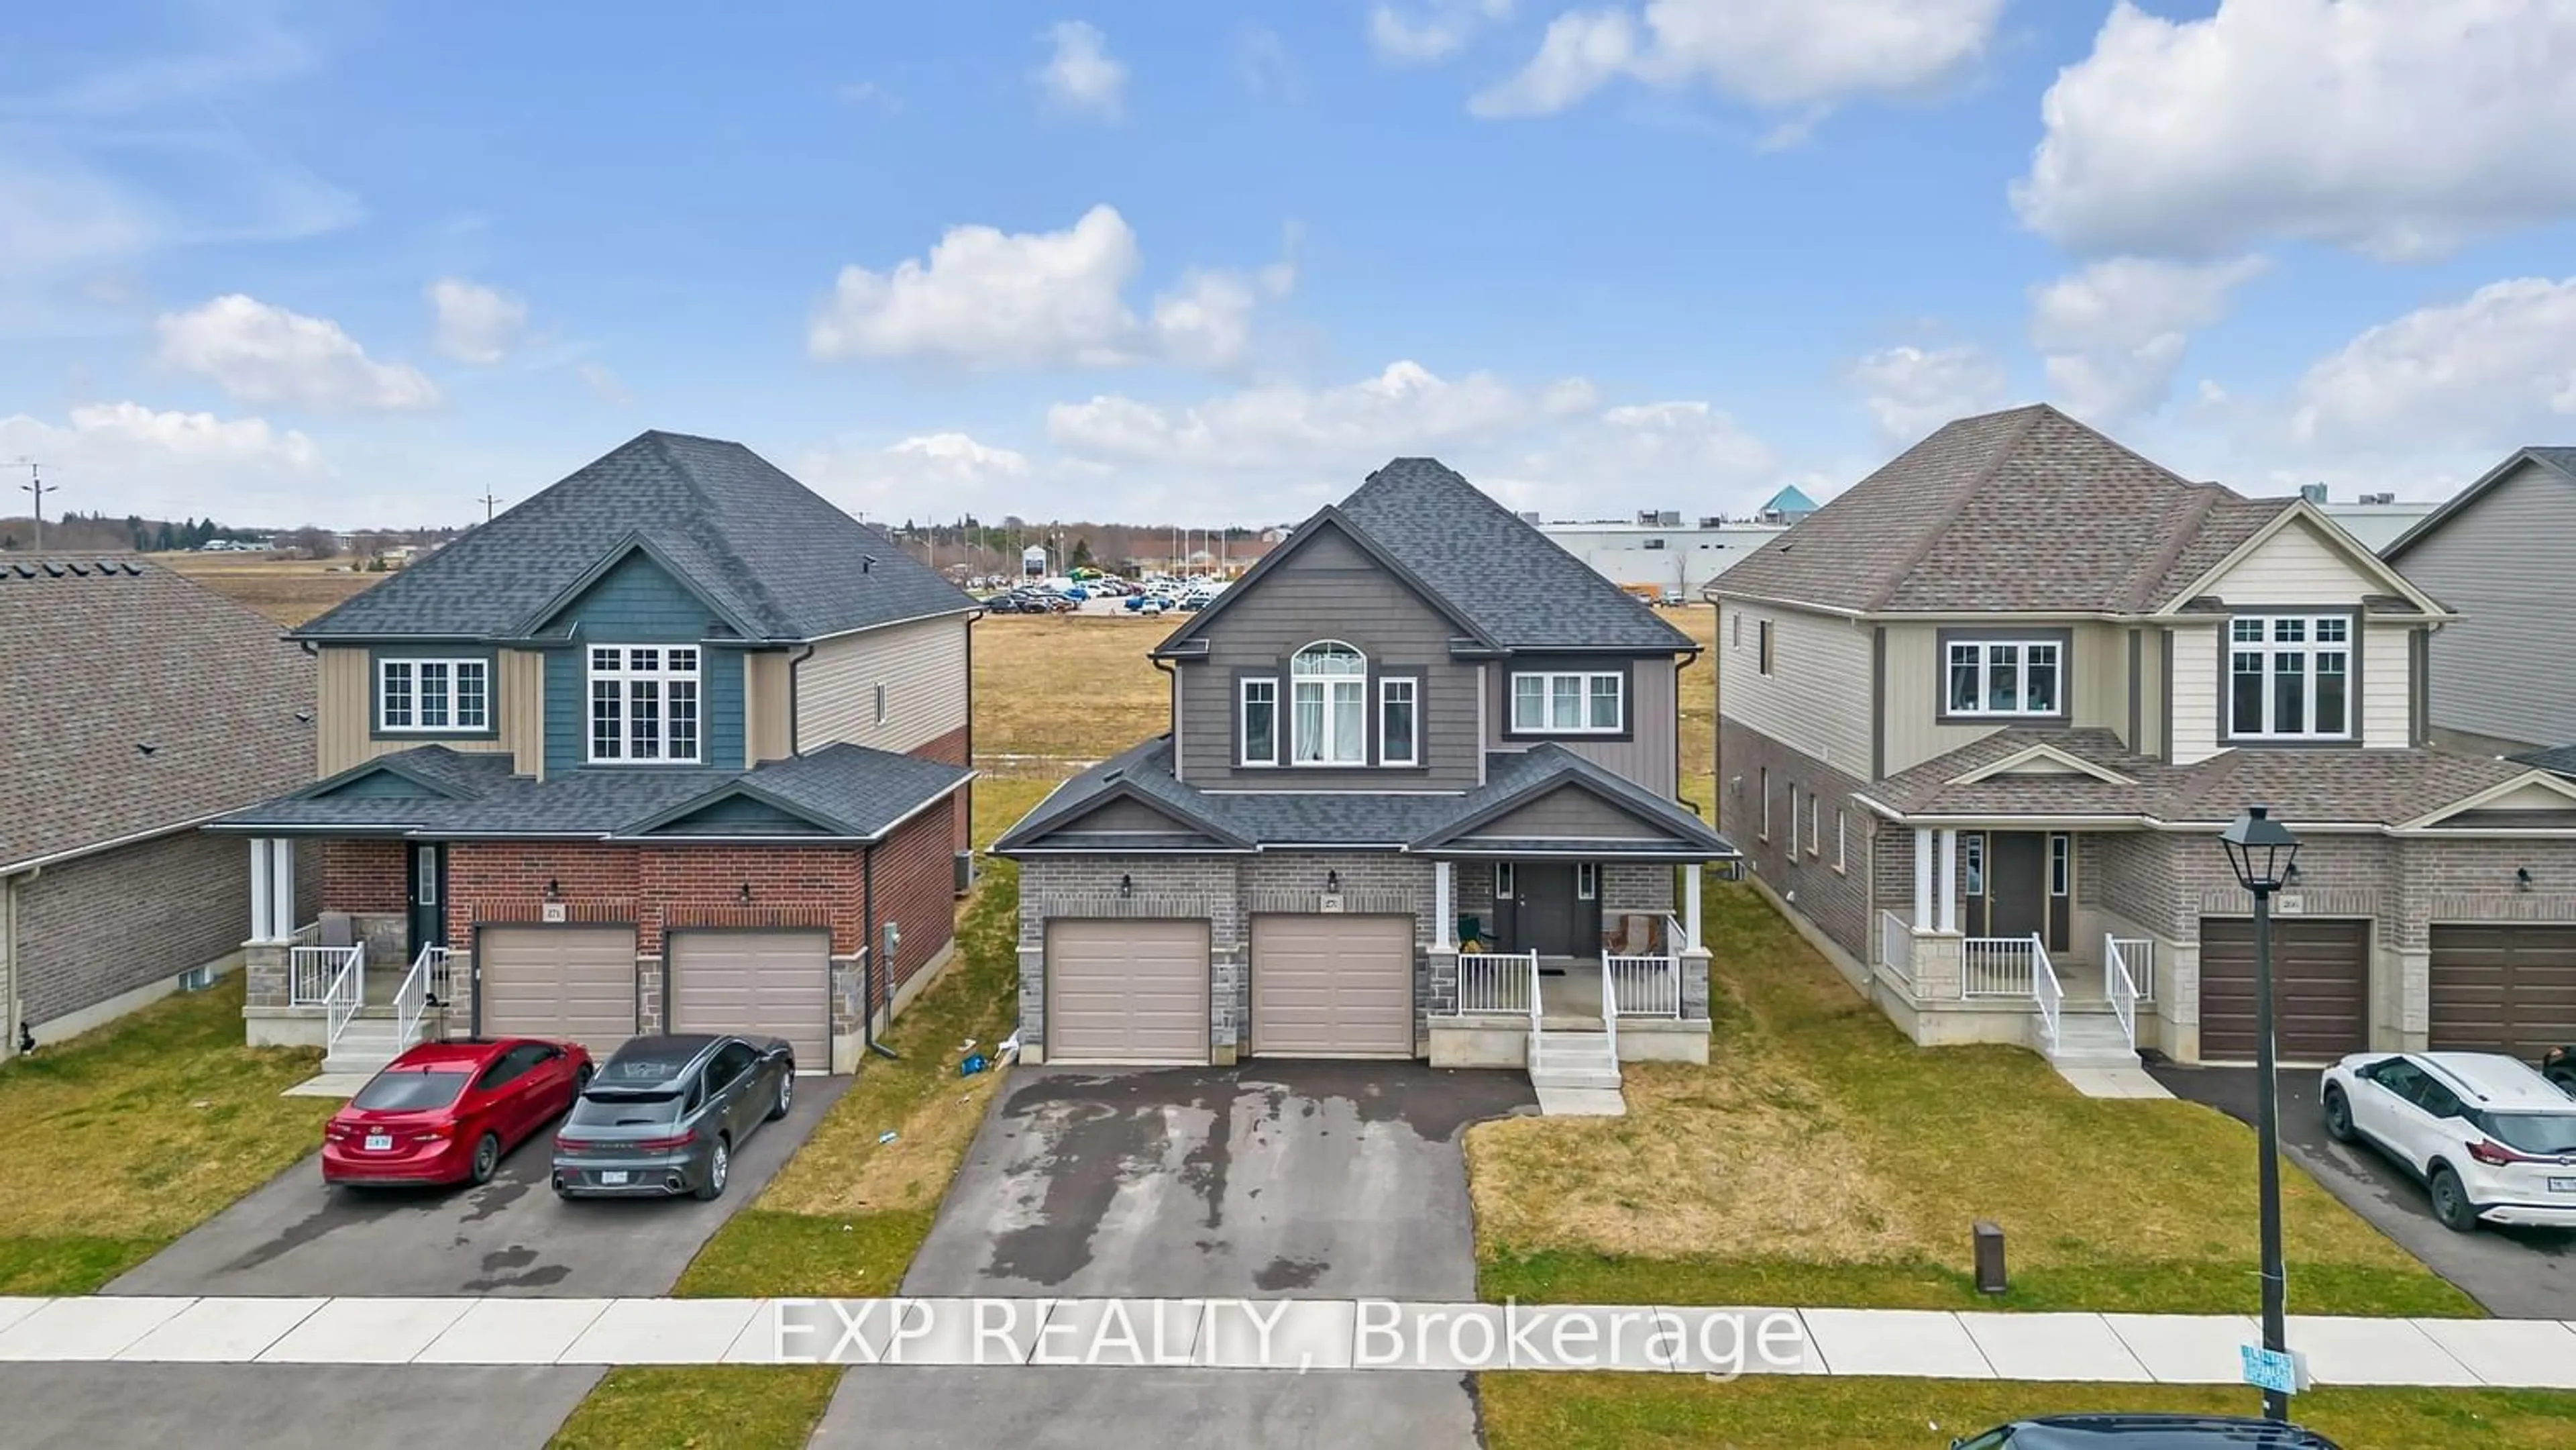 Frontside or backside of a home for 270 Bradshaw Dr, Stratford Ontario N5A 0C8